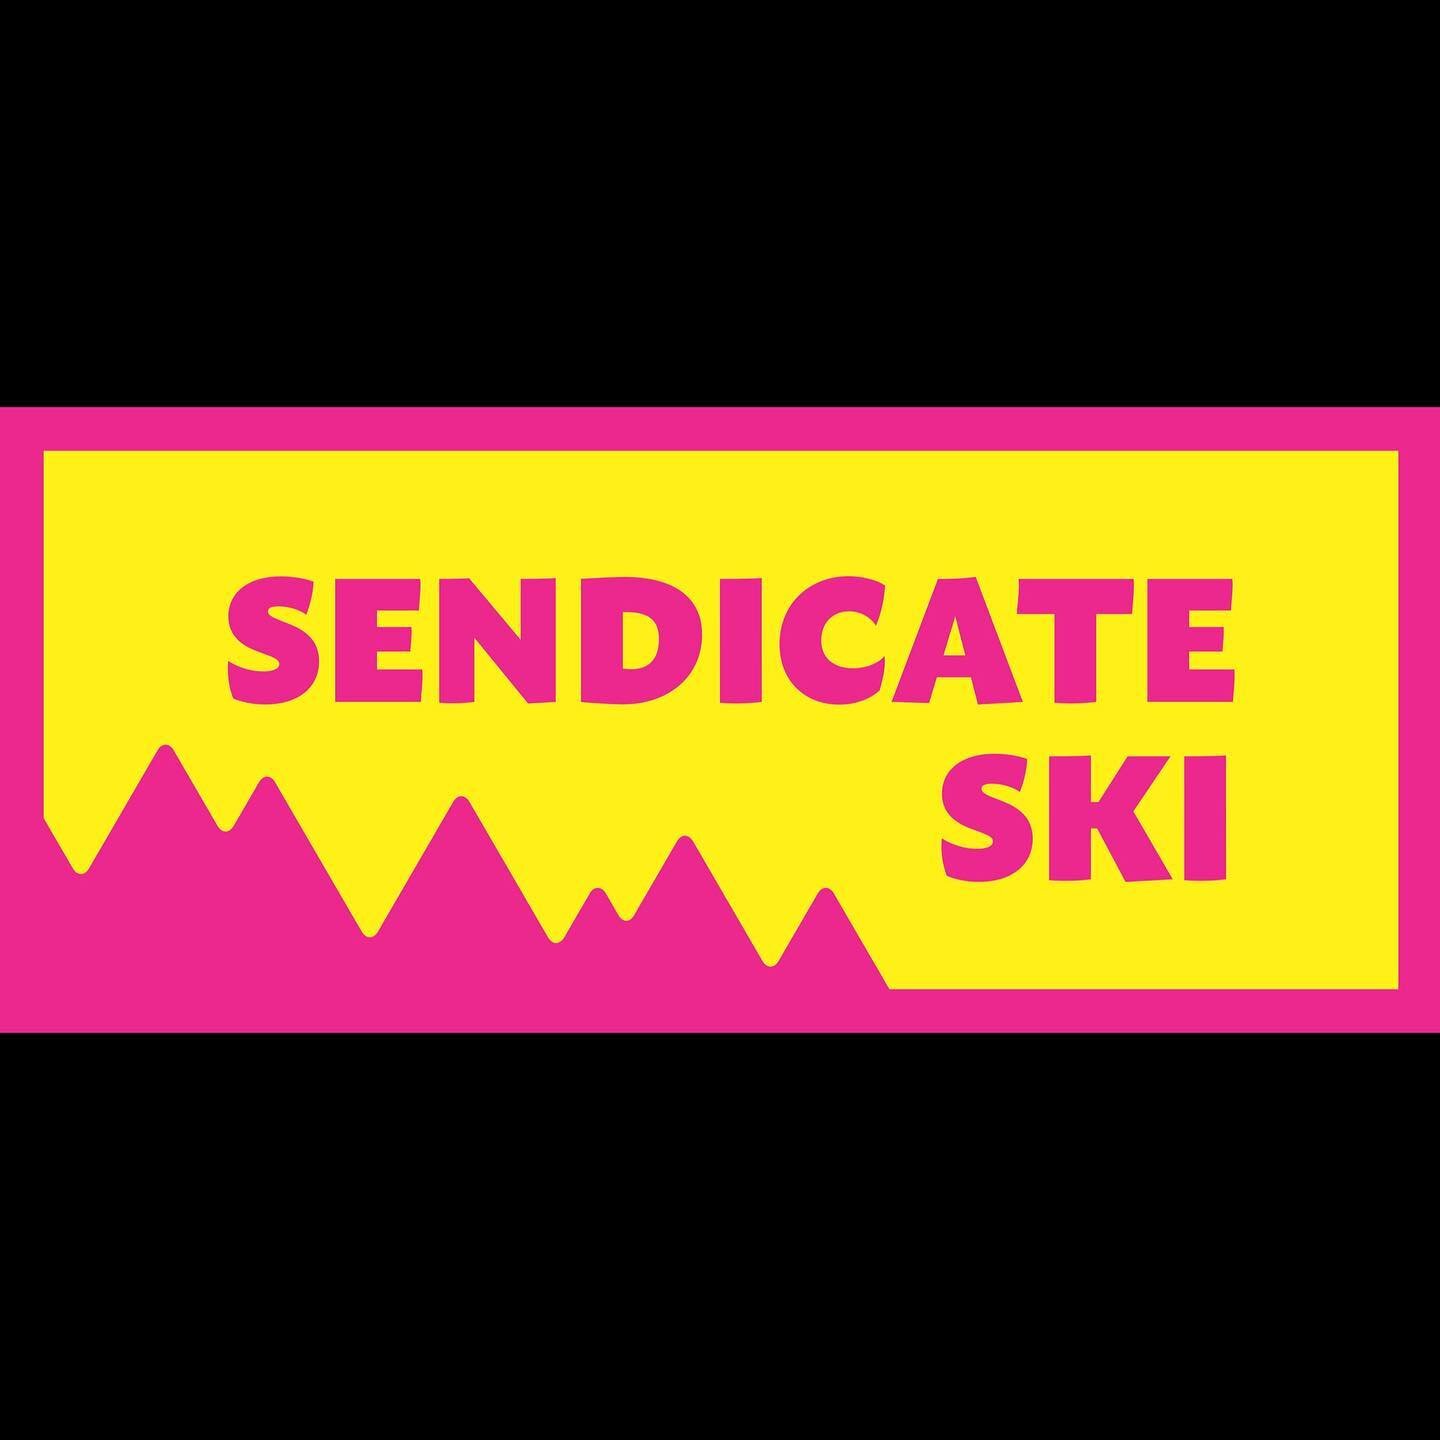 Hi, Friends! I have some important news that I want to personally share. As of today, we are now officially SENDICATE SKI! After spending countless hours thinking it through and consulting a handful of close family members and trusted friends, I have